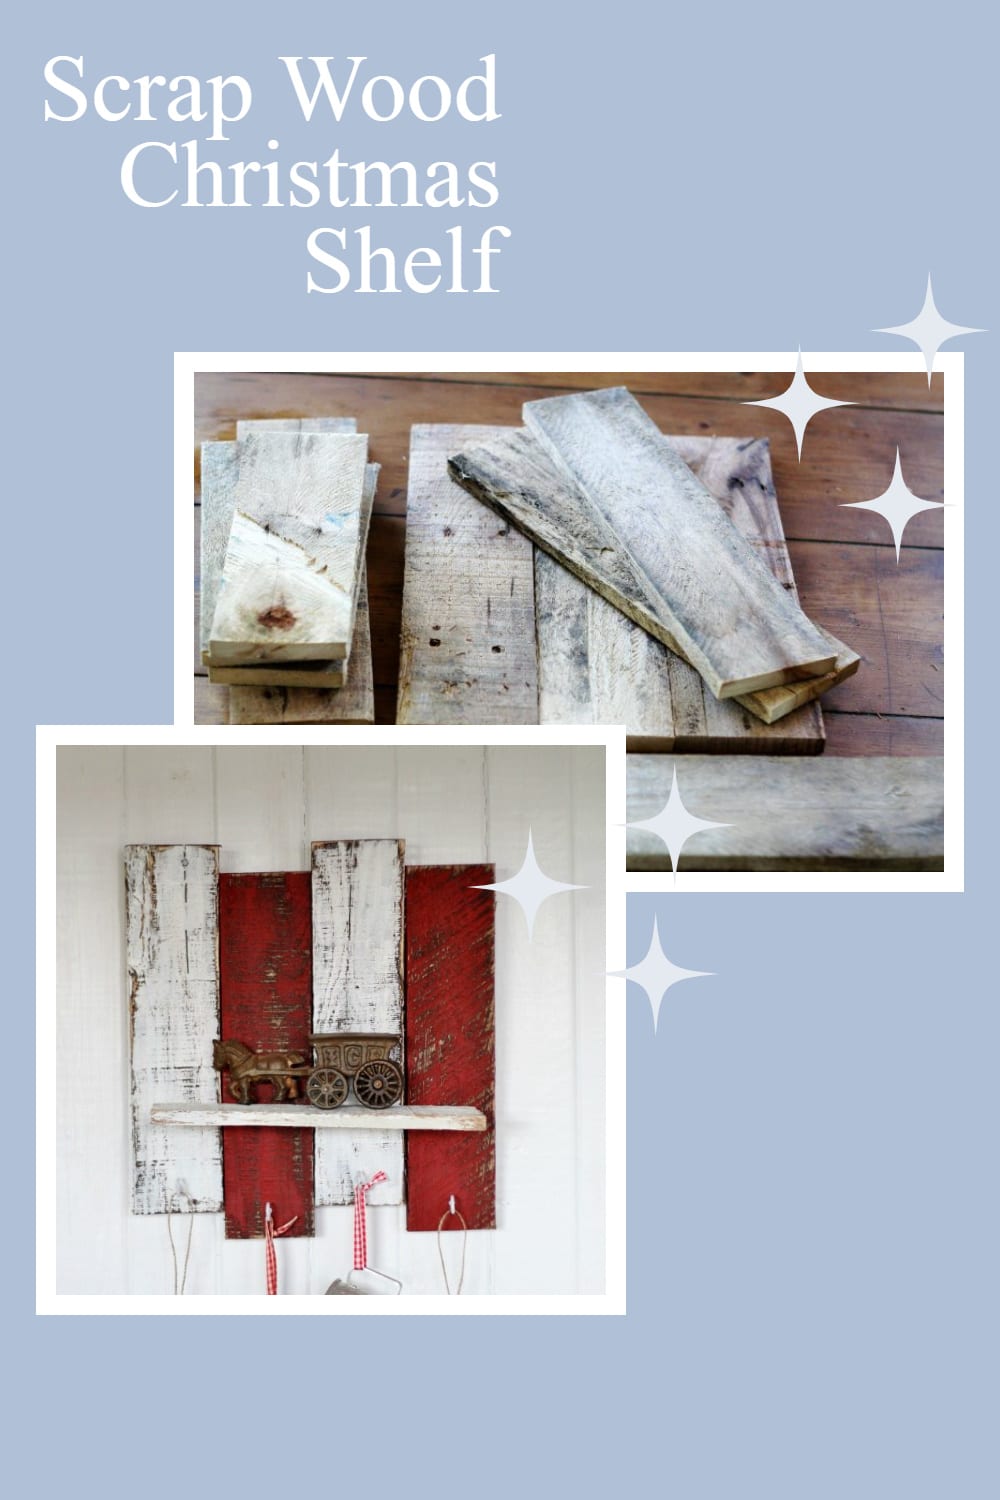 How to make a scrap wood Christmas shelf out of pallet boards. This small piece is perfect for hanging stockings or towels, etc. #MyRepurposedLife #NickofTime #pallet #christmas via @repurposedlife